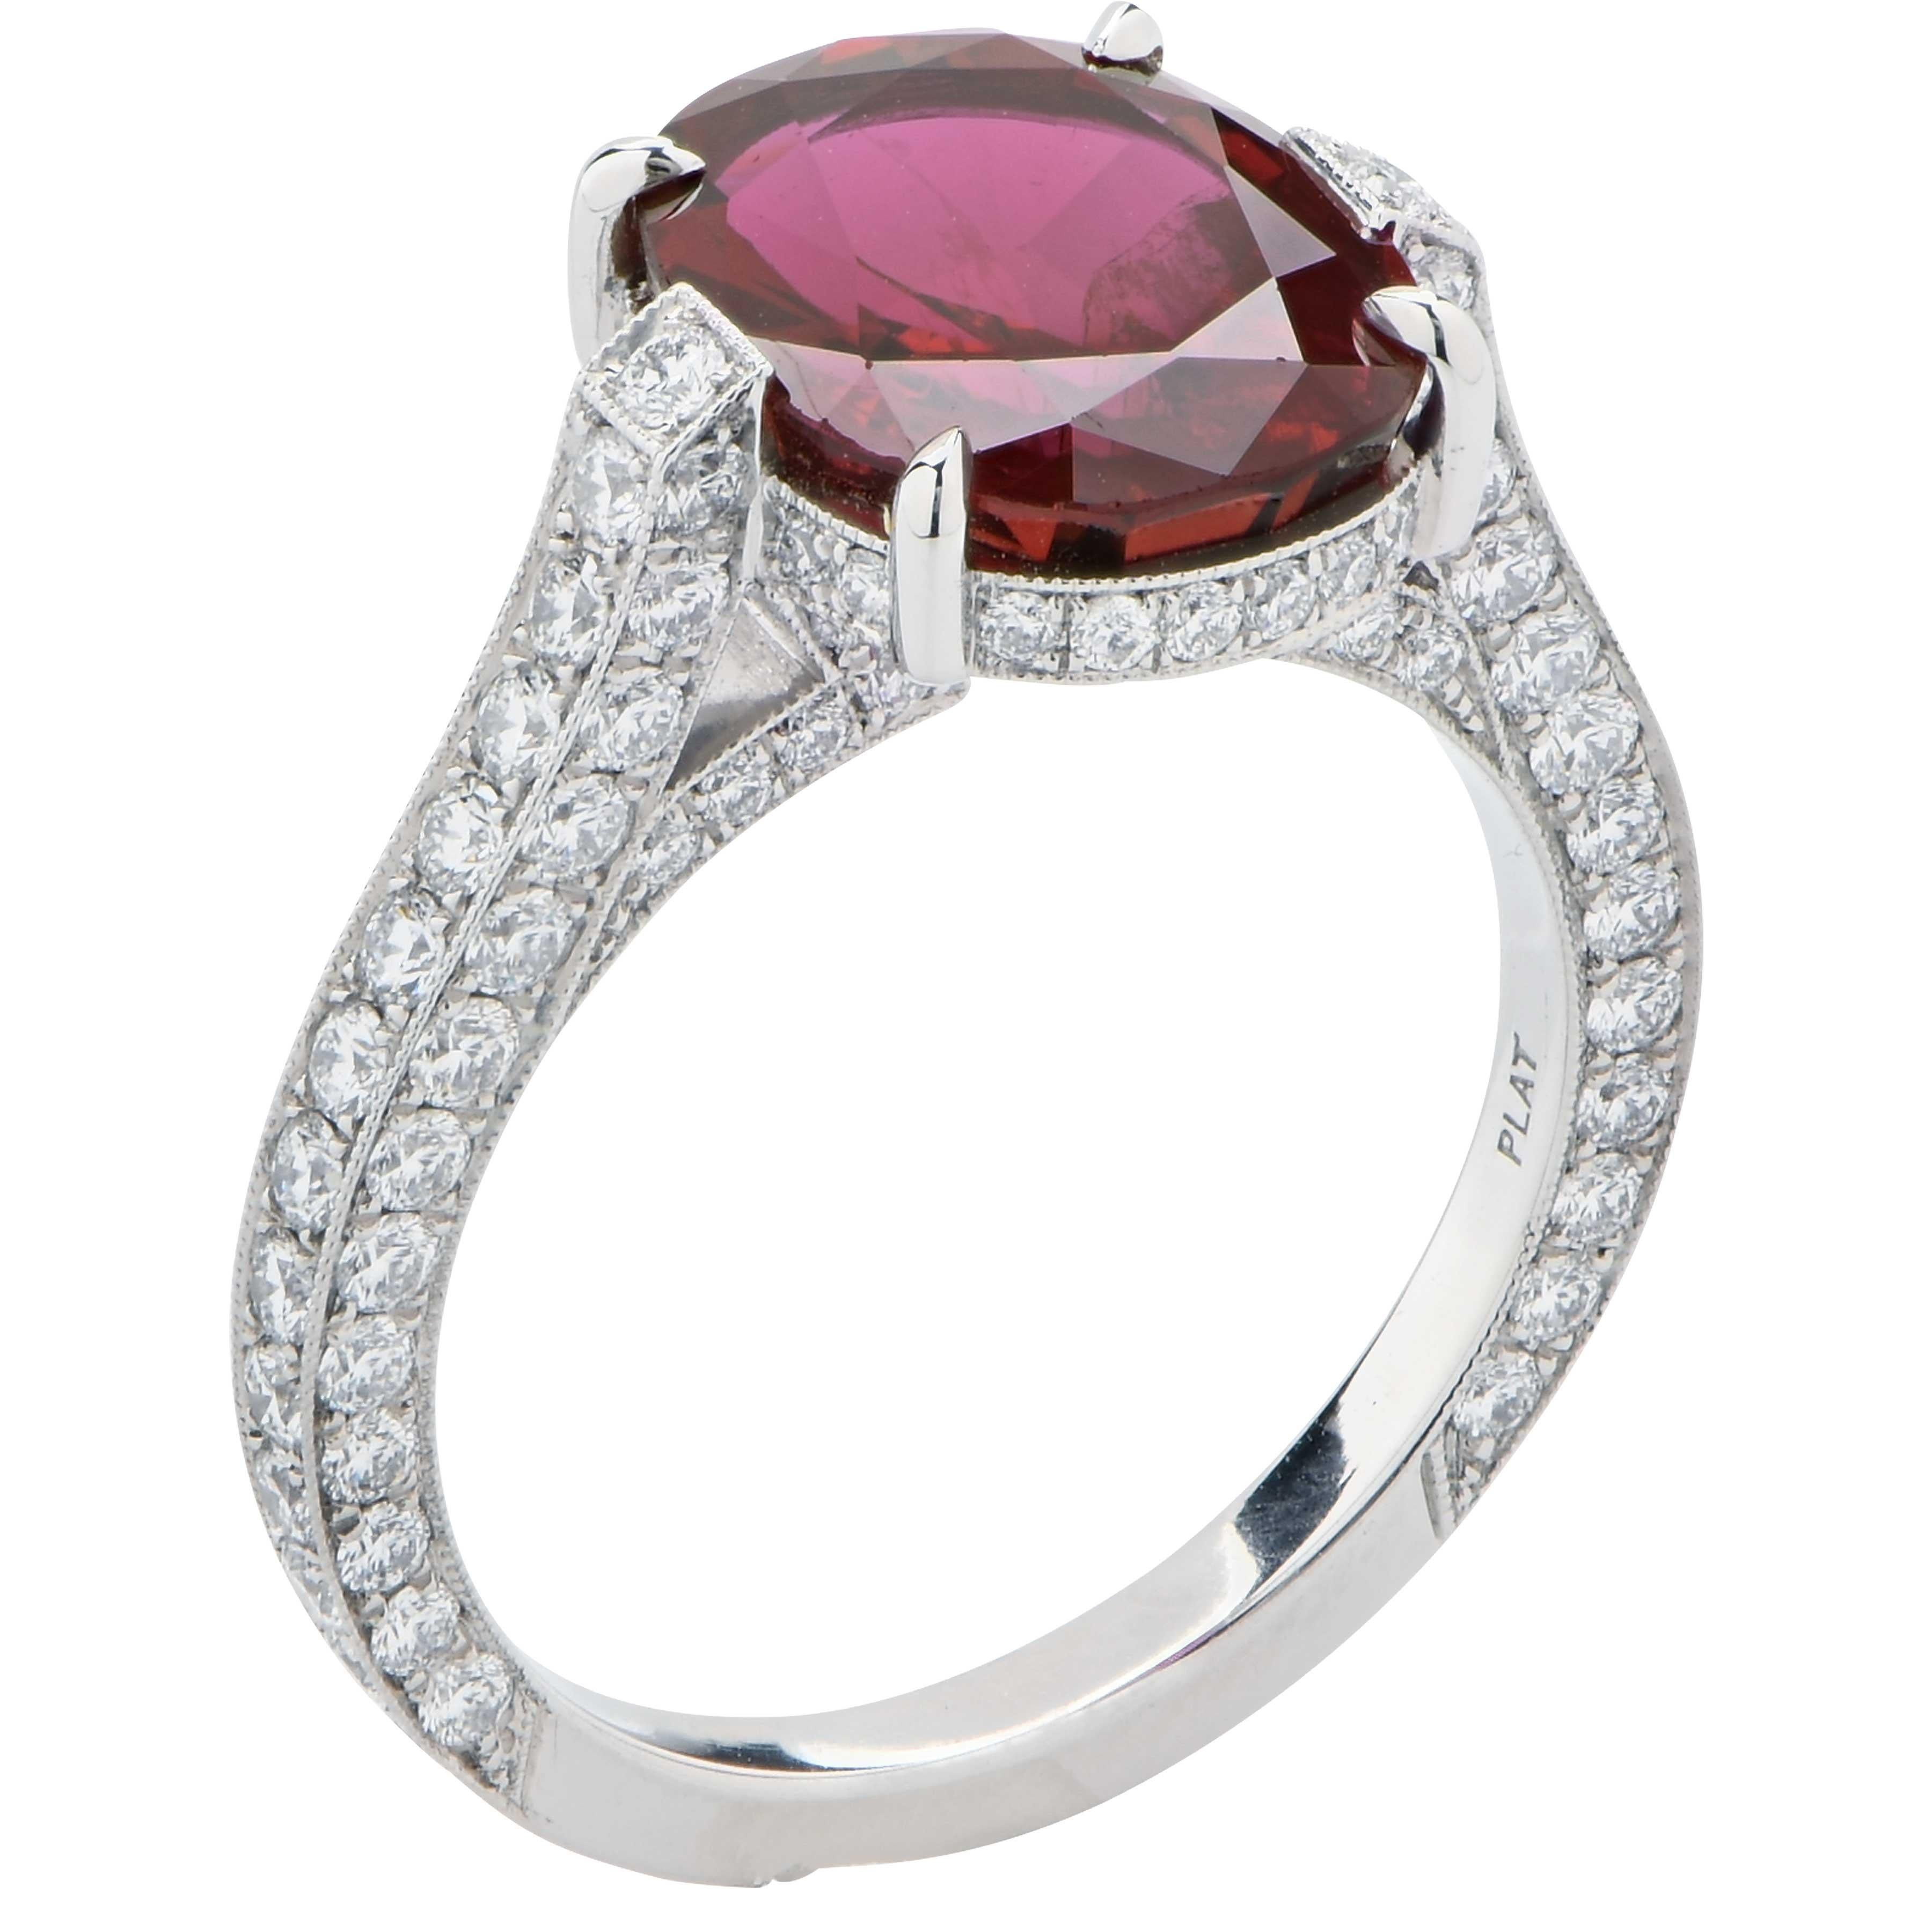 Ruby and Diamond ring featuring a 4.72 Oval Cut AGL Graded No Heat Ruby prong set in a platinum ring with 120 round brilliant cut diamonds weighing 1.40 carats.
Ring Size: 5 3/4 (Can be sized)
Metal: Platinum
Metal Weight: 6.5 Grams
